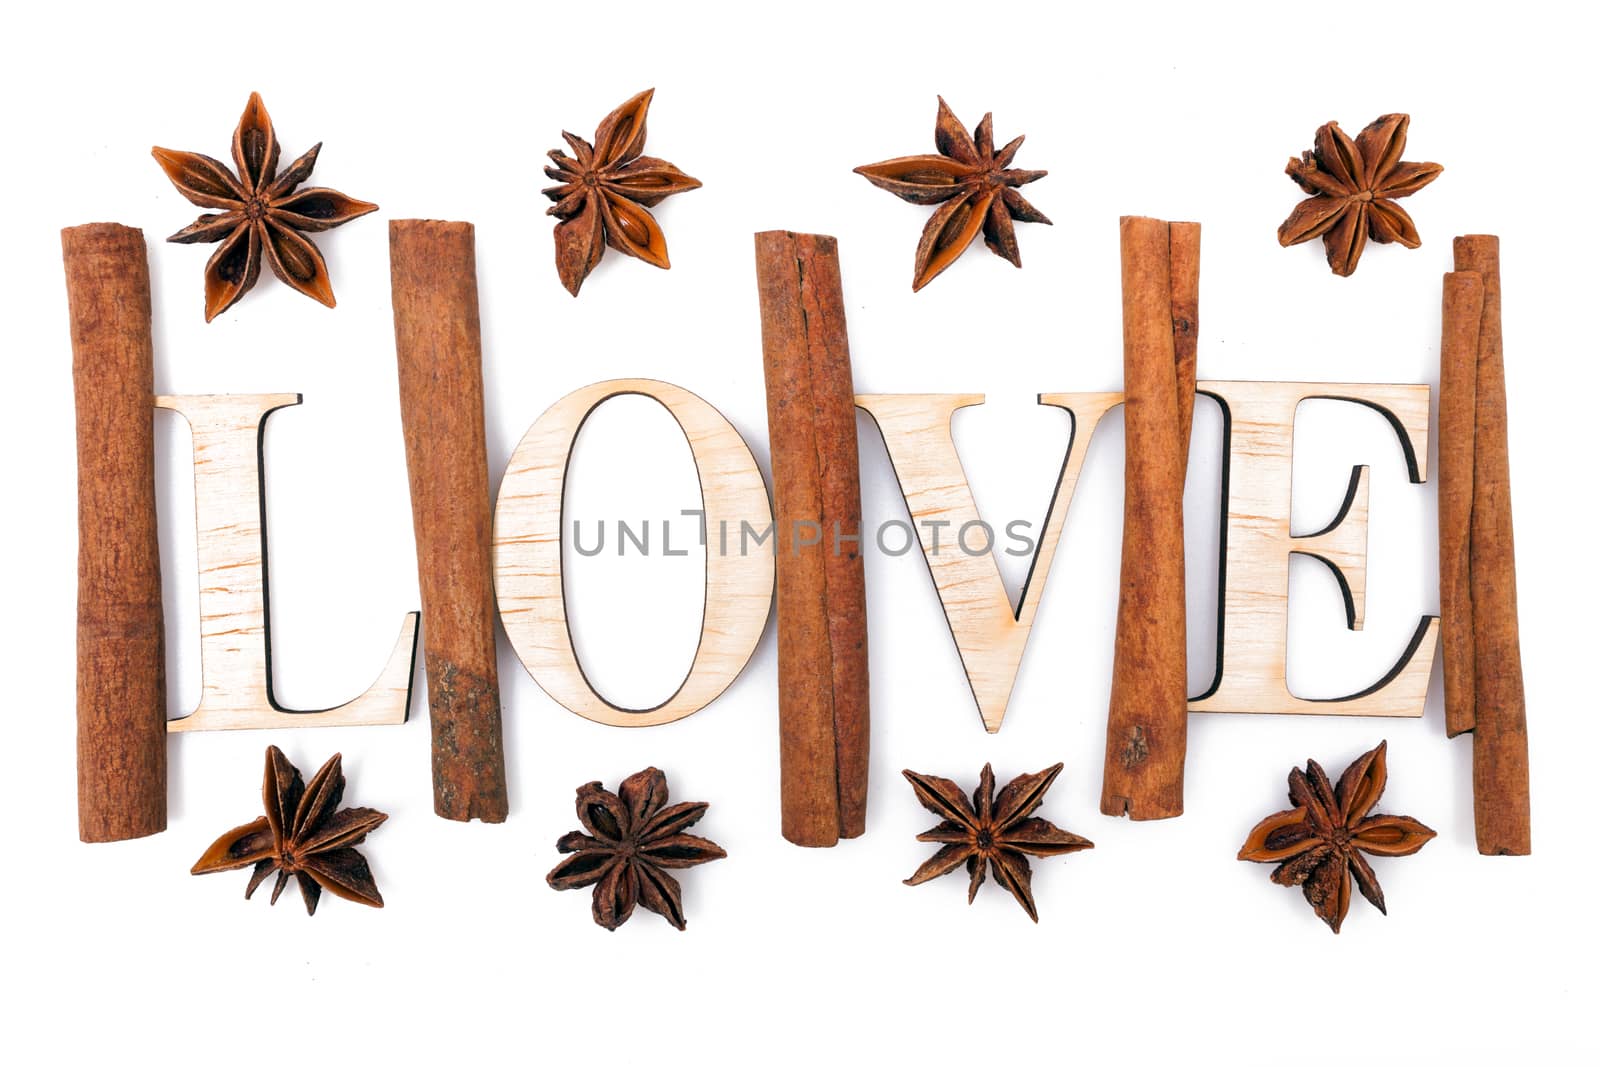 Cinnamon and star anise are in love by Portokalis